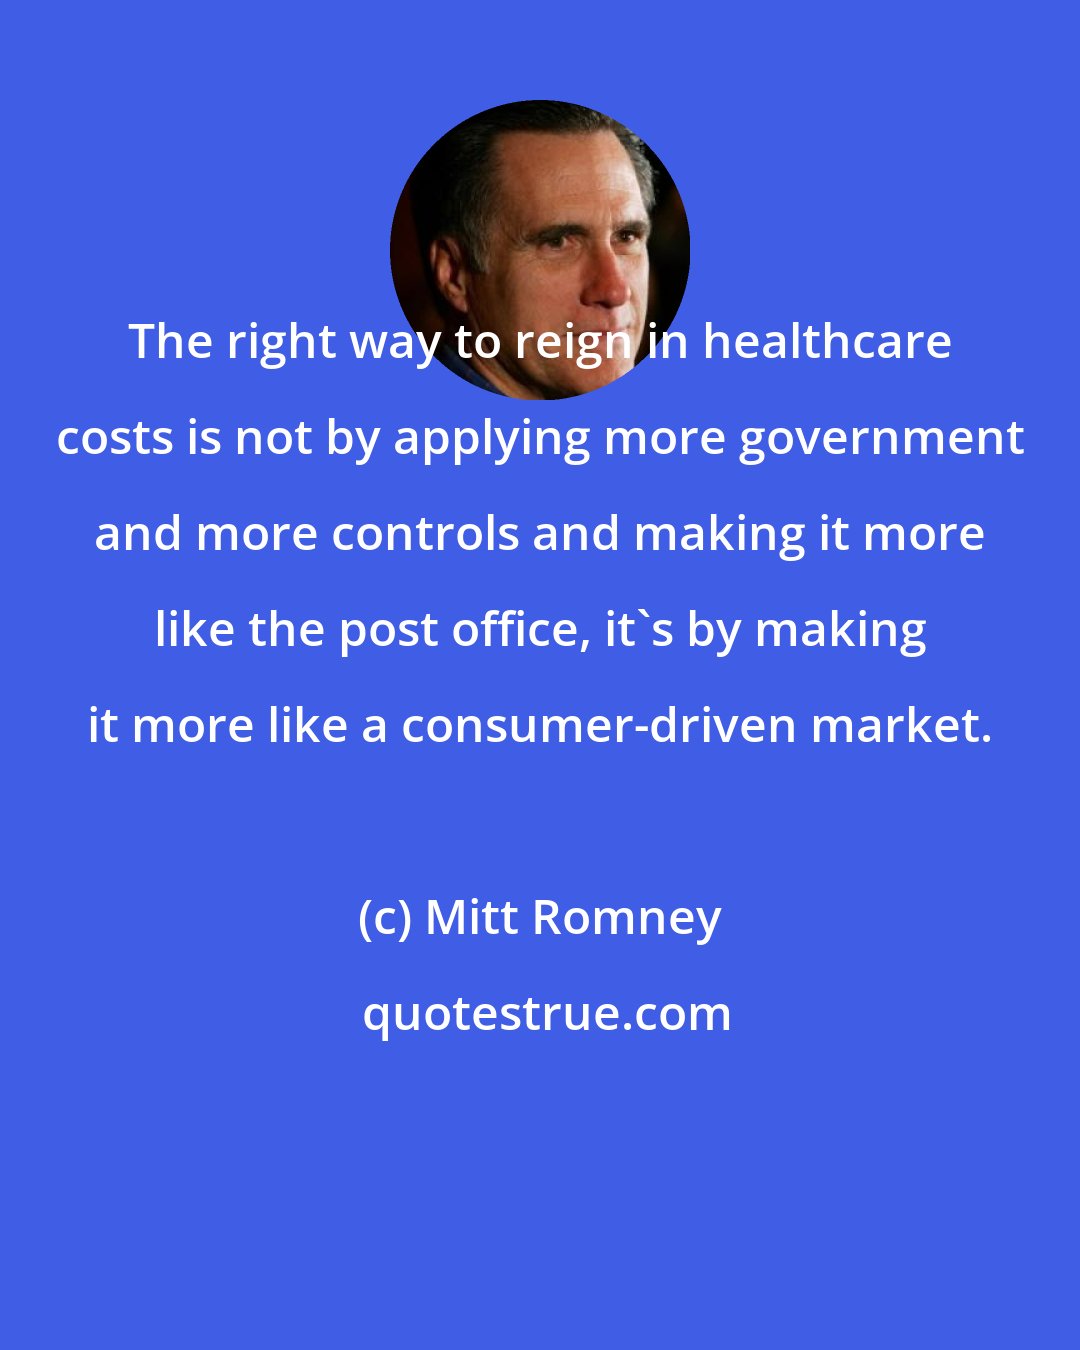 Mitt Romney: The right way to reign in healthcare costs is not by applying more government and more controls and making it more like the post office, it's by making it more like a consumer-driven market.